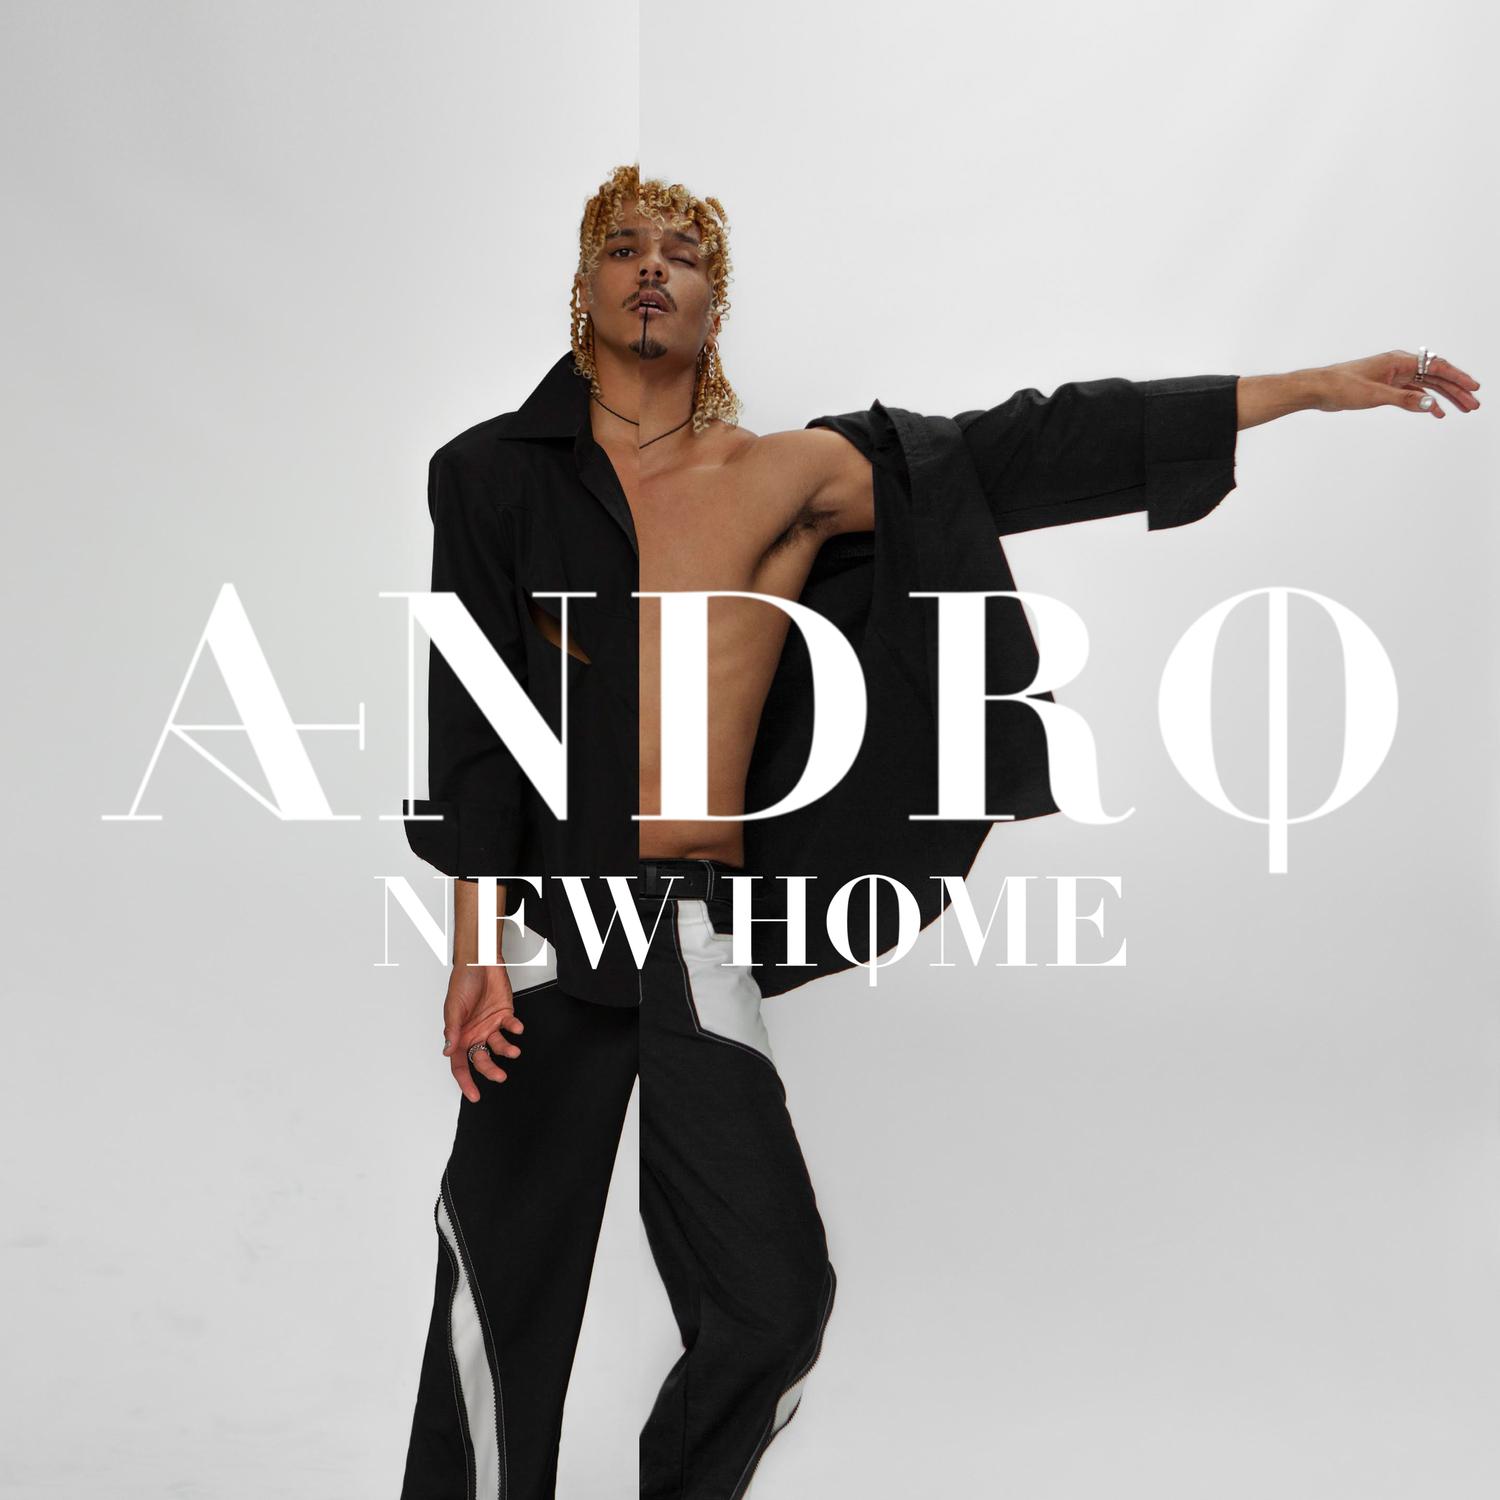 Andro - New Home